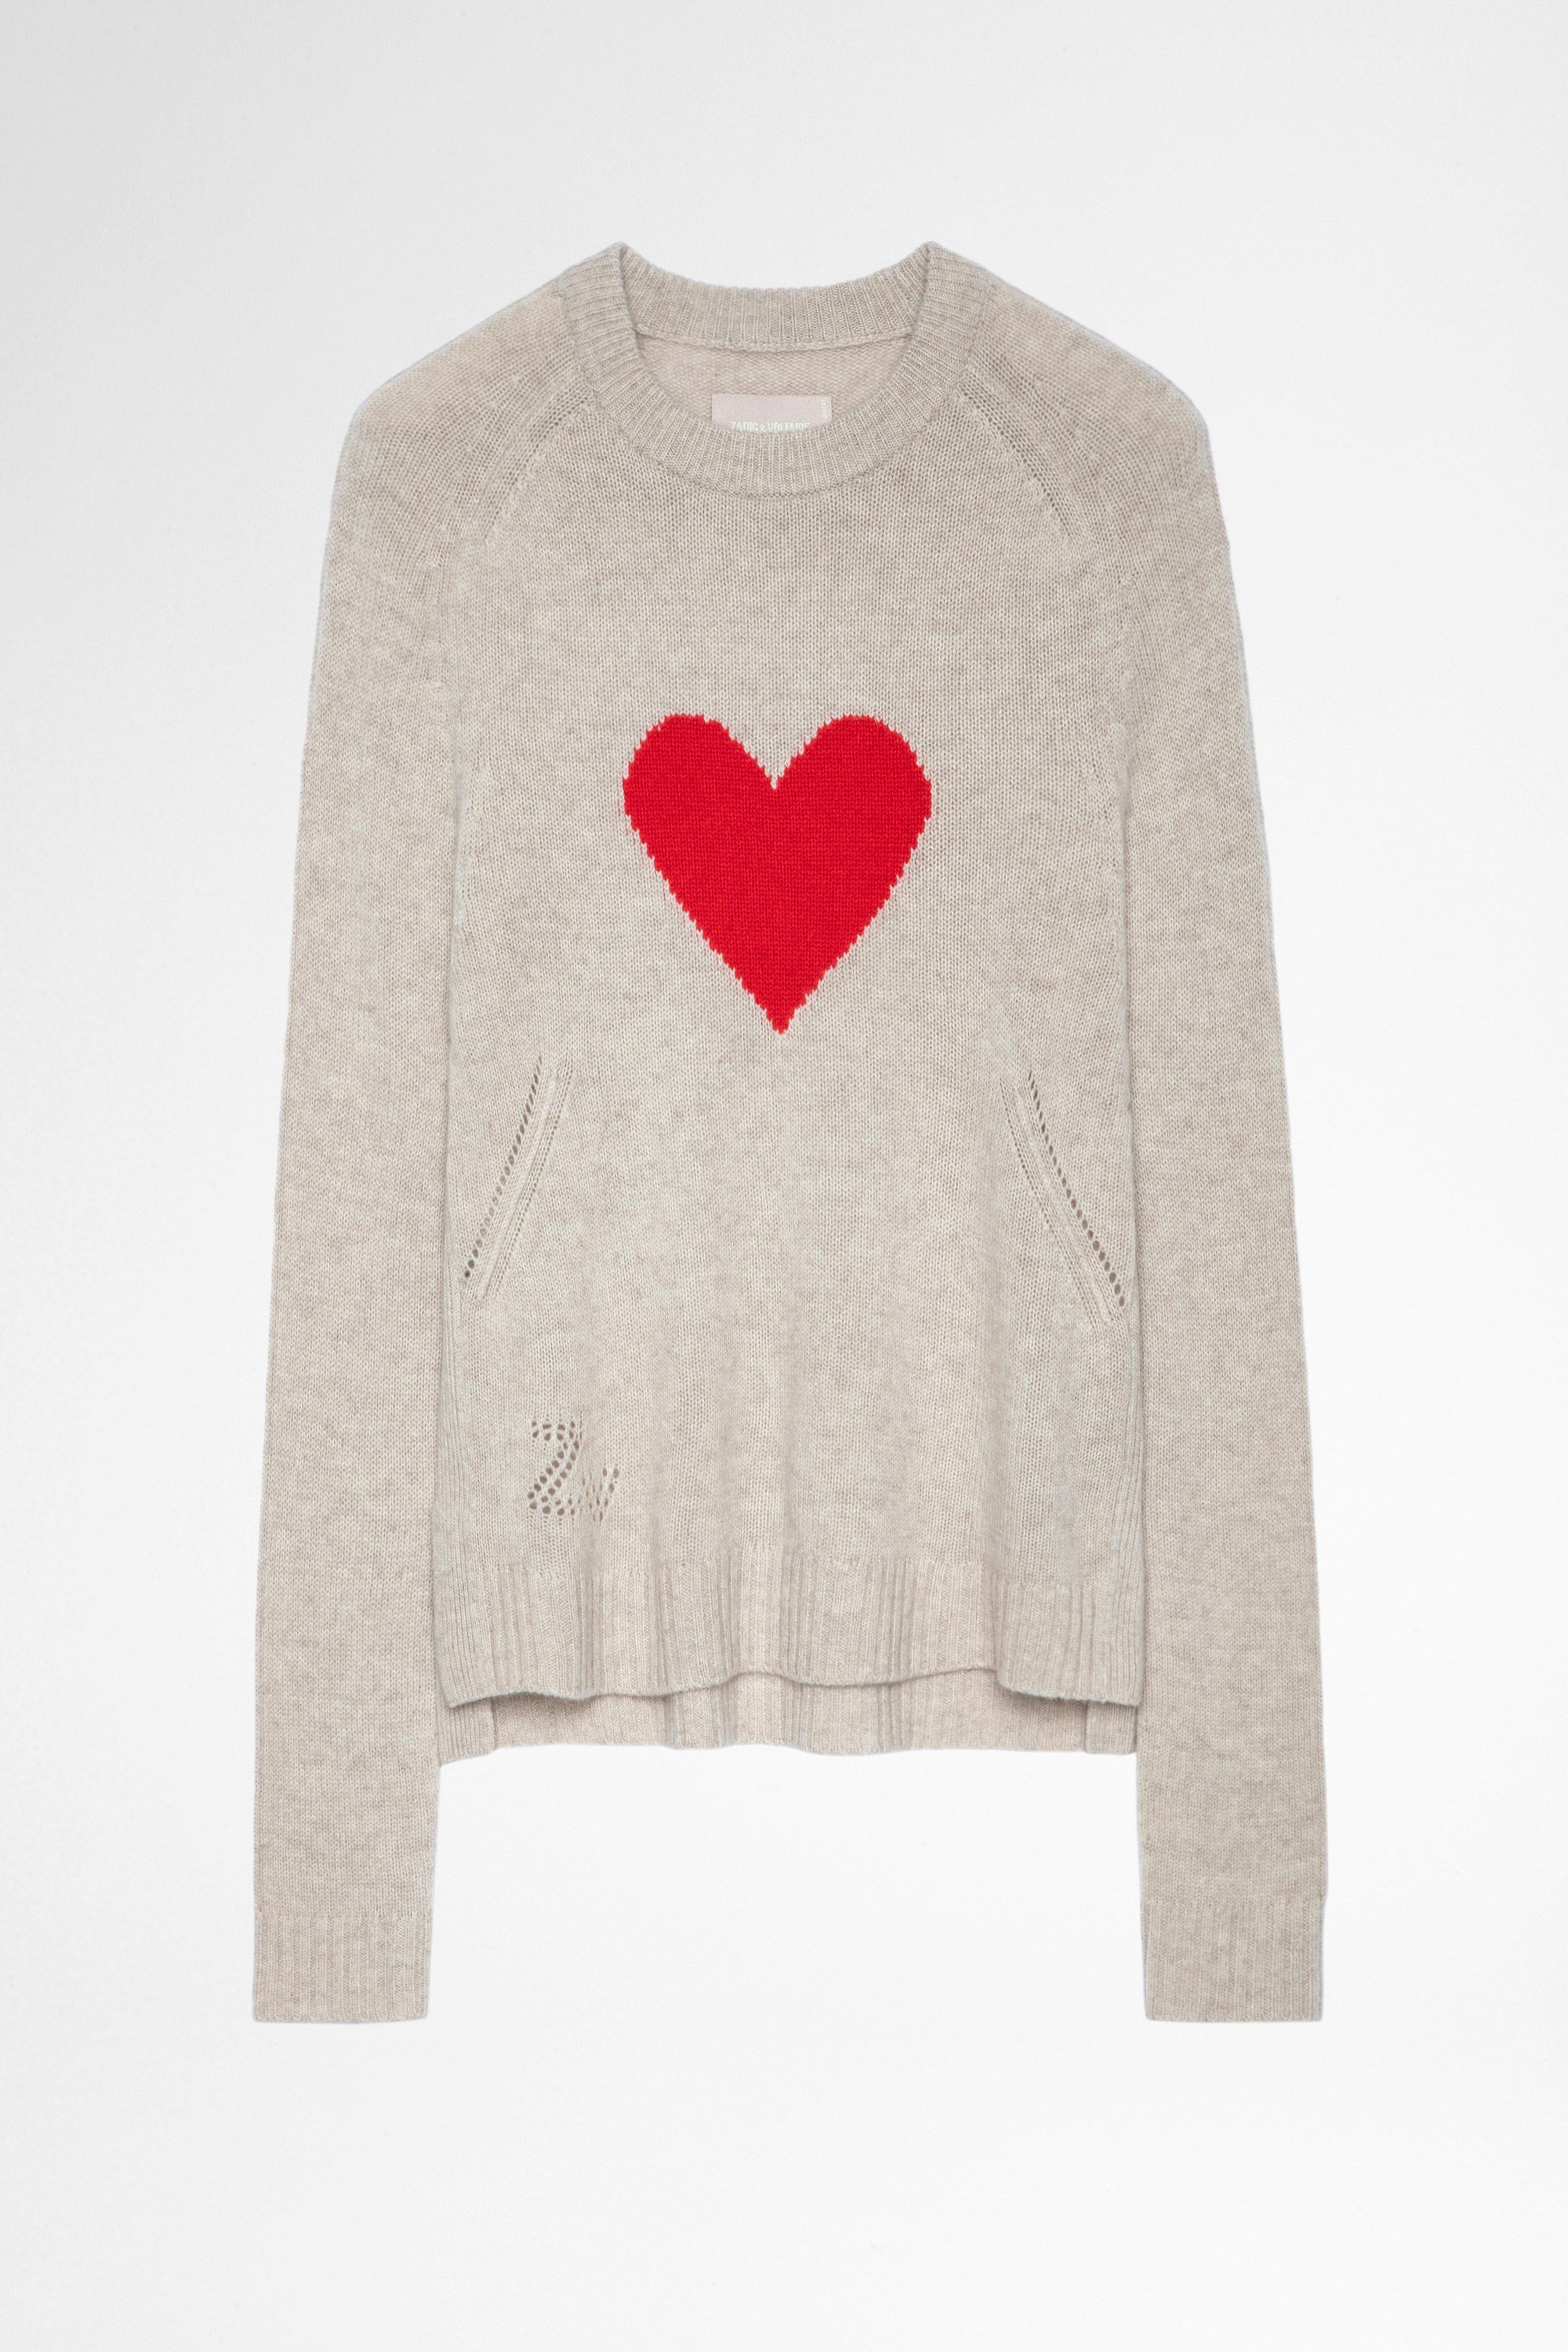 Lili Heart Sweater Cashmere Women's beige cashmere sweater with heart print